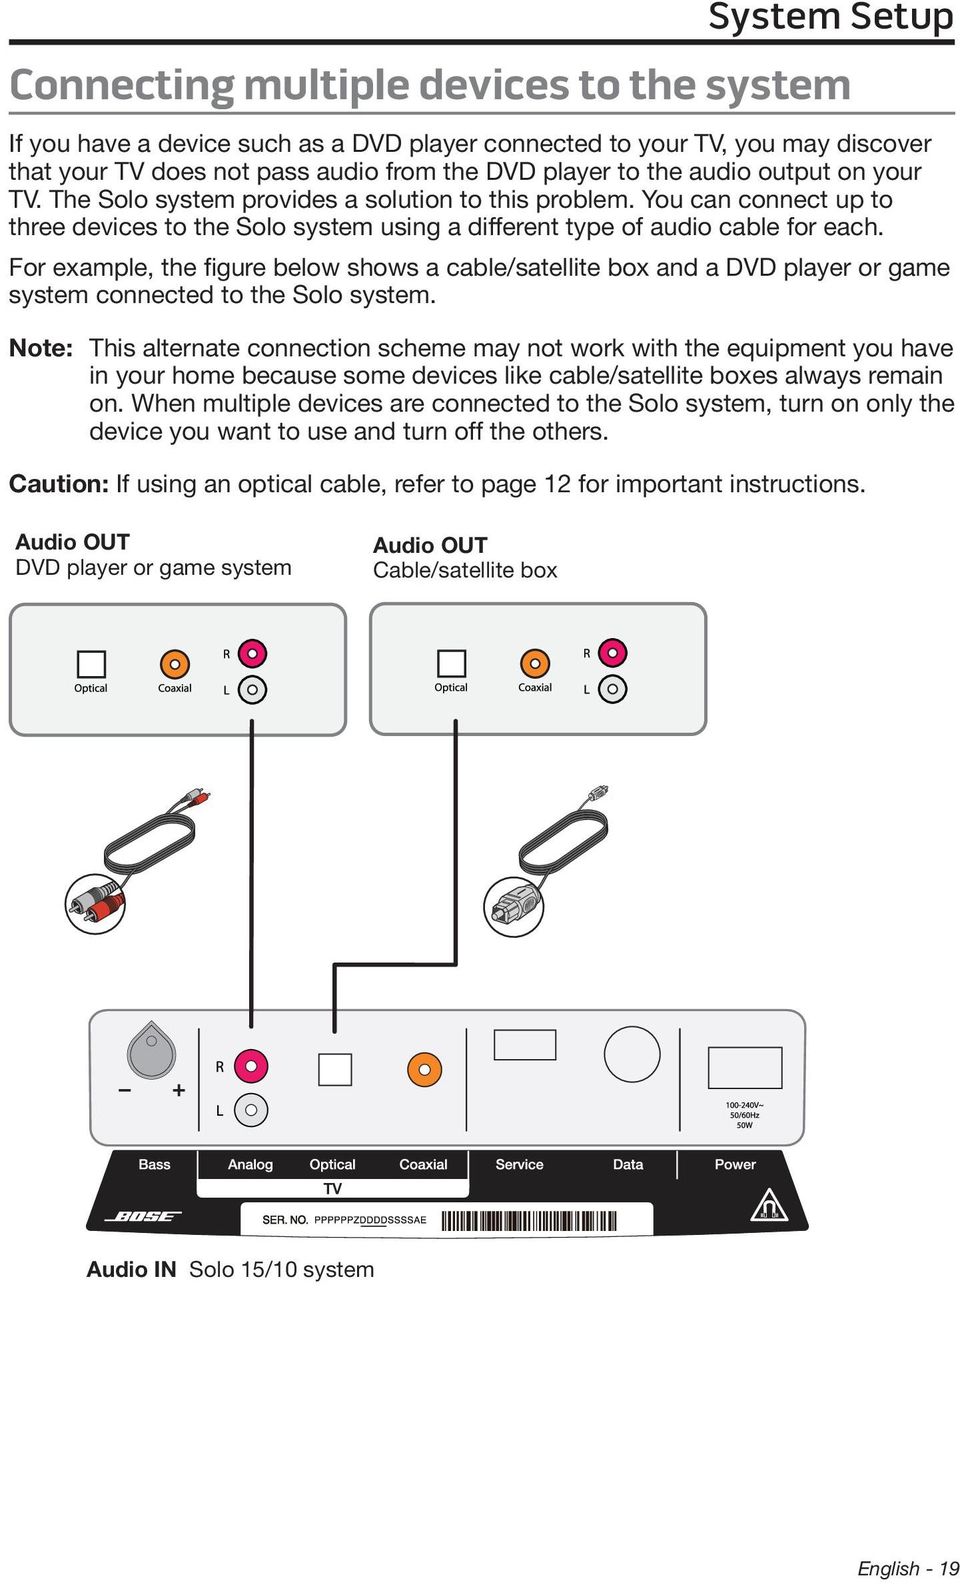 For example, the figure below shows a cable/satellite box and a DVD player or game system connected to the Solo system.